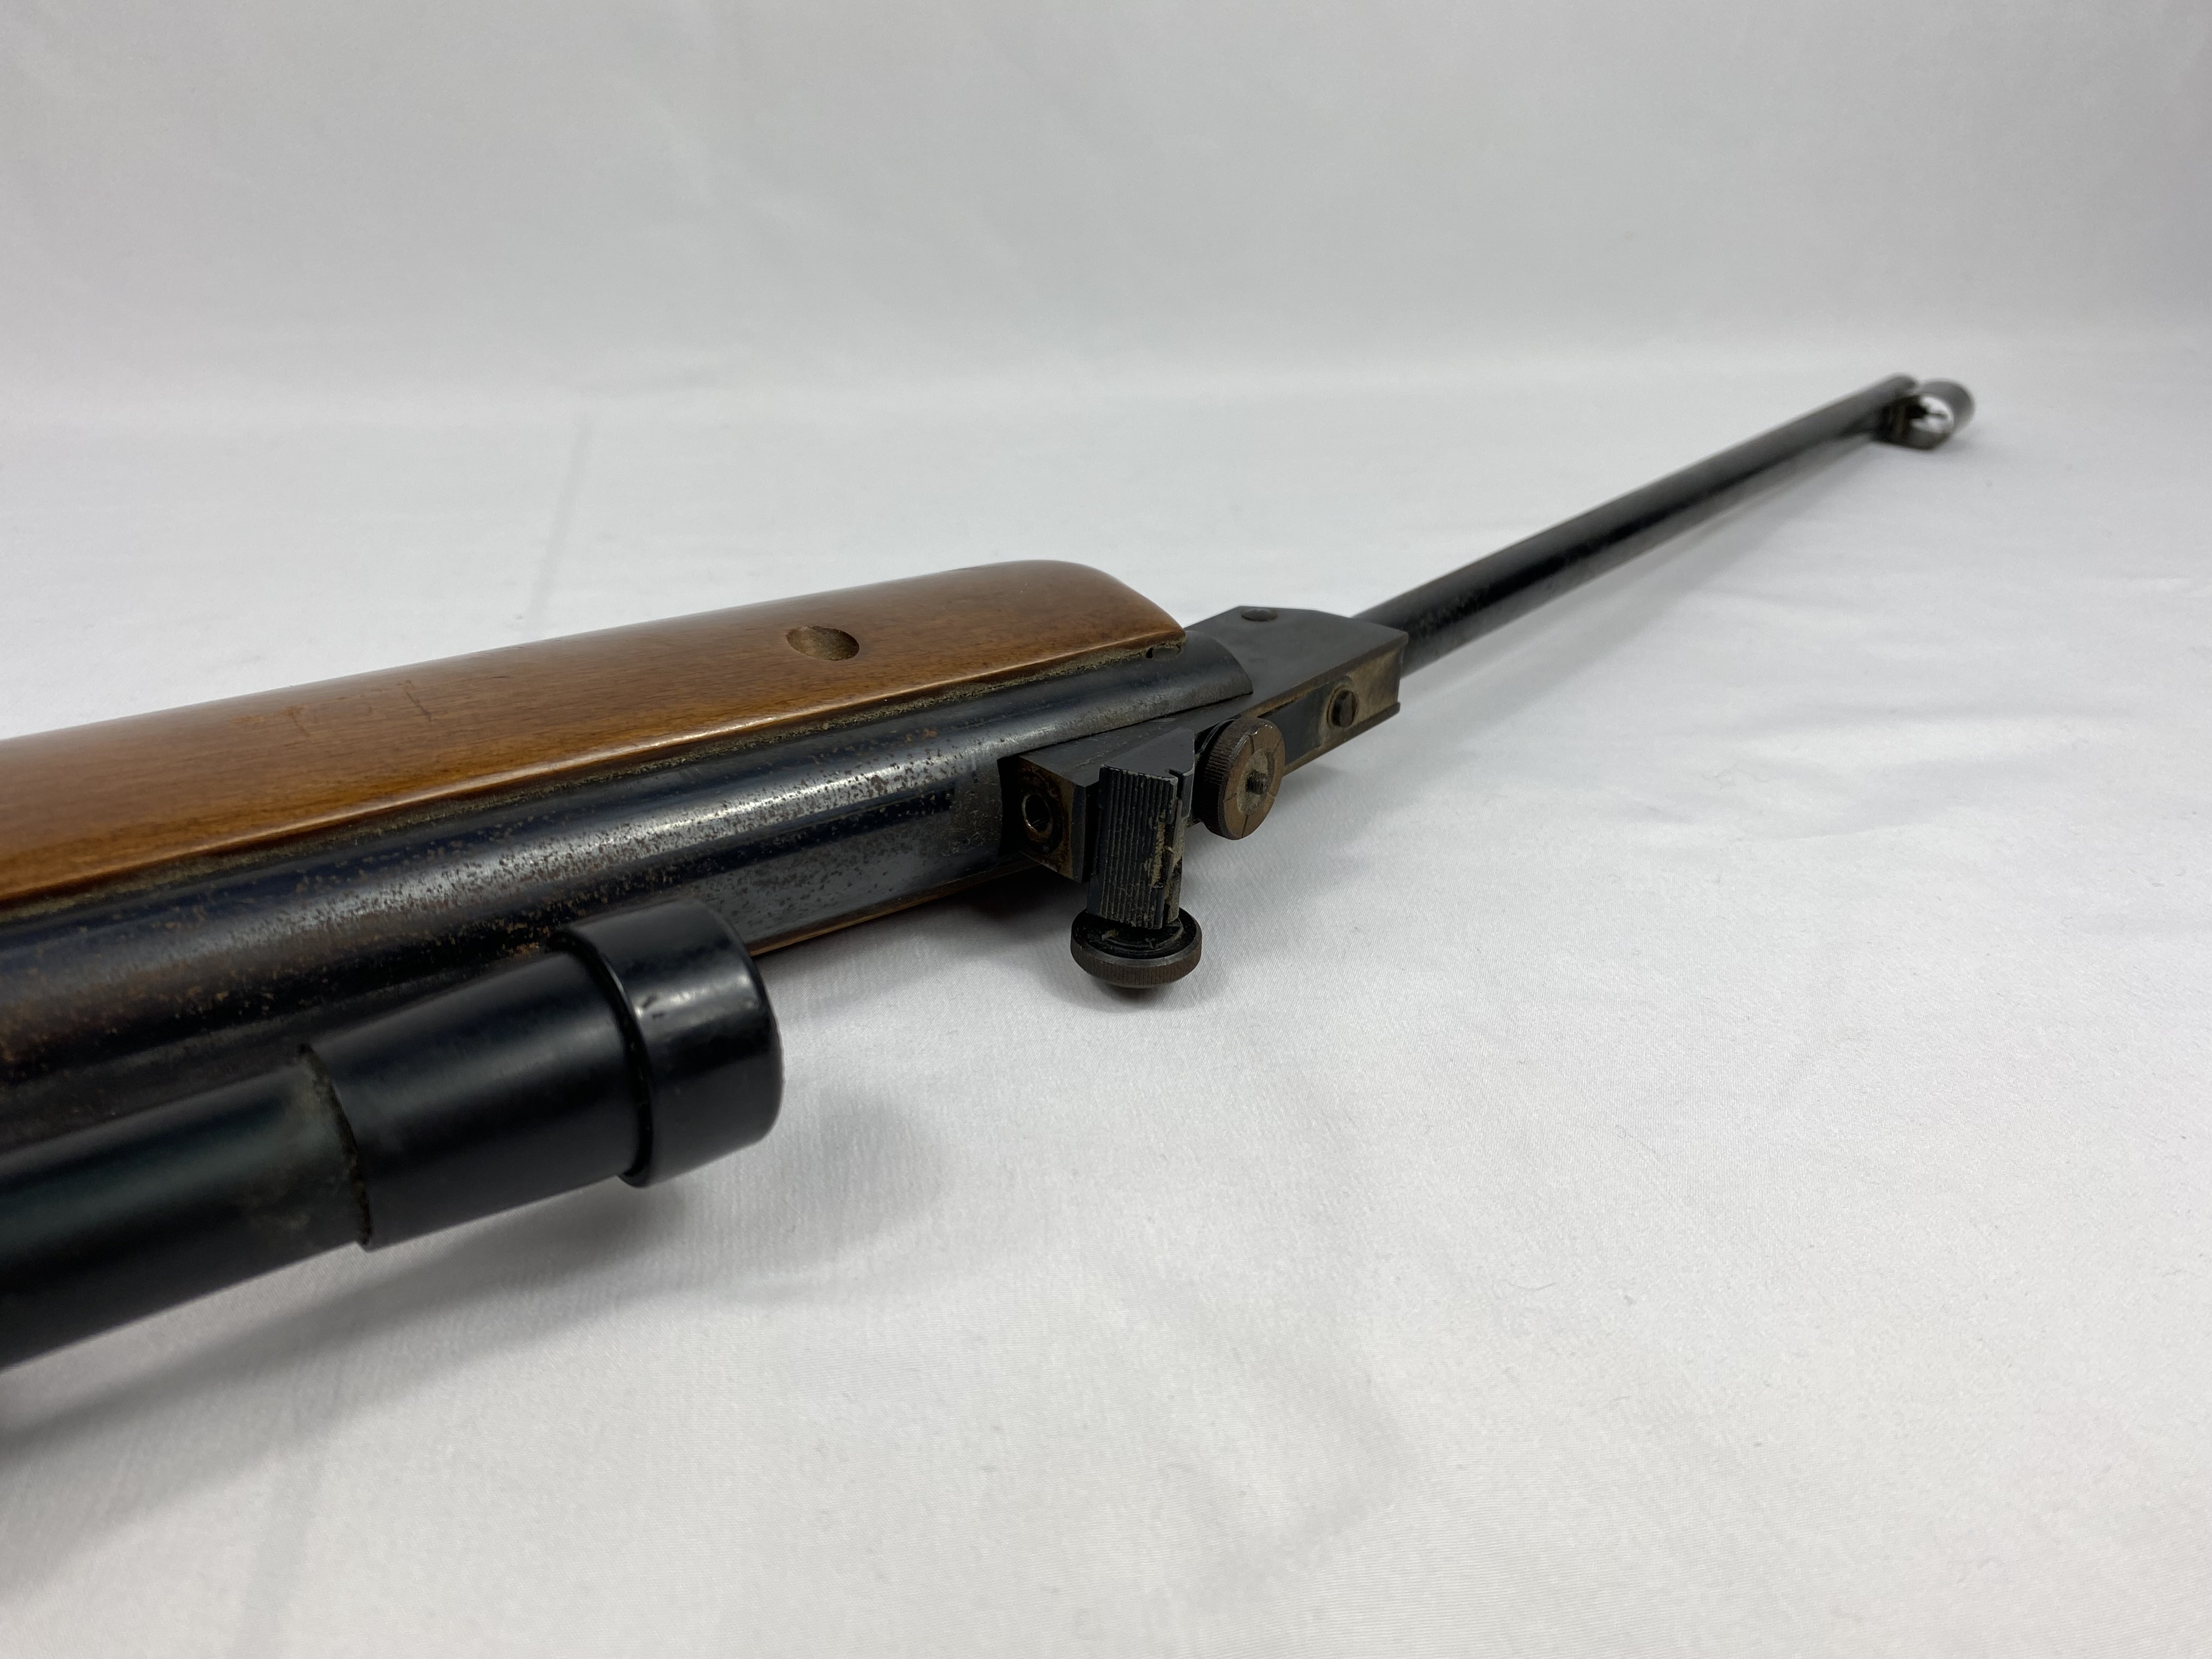 Diana Series 70 air rifle with 3x telescopic sight - Image 4 of 5